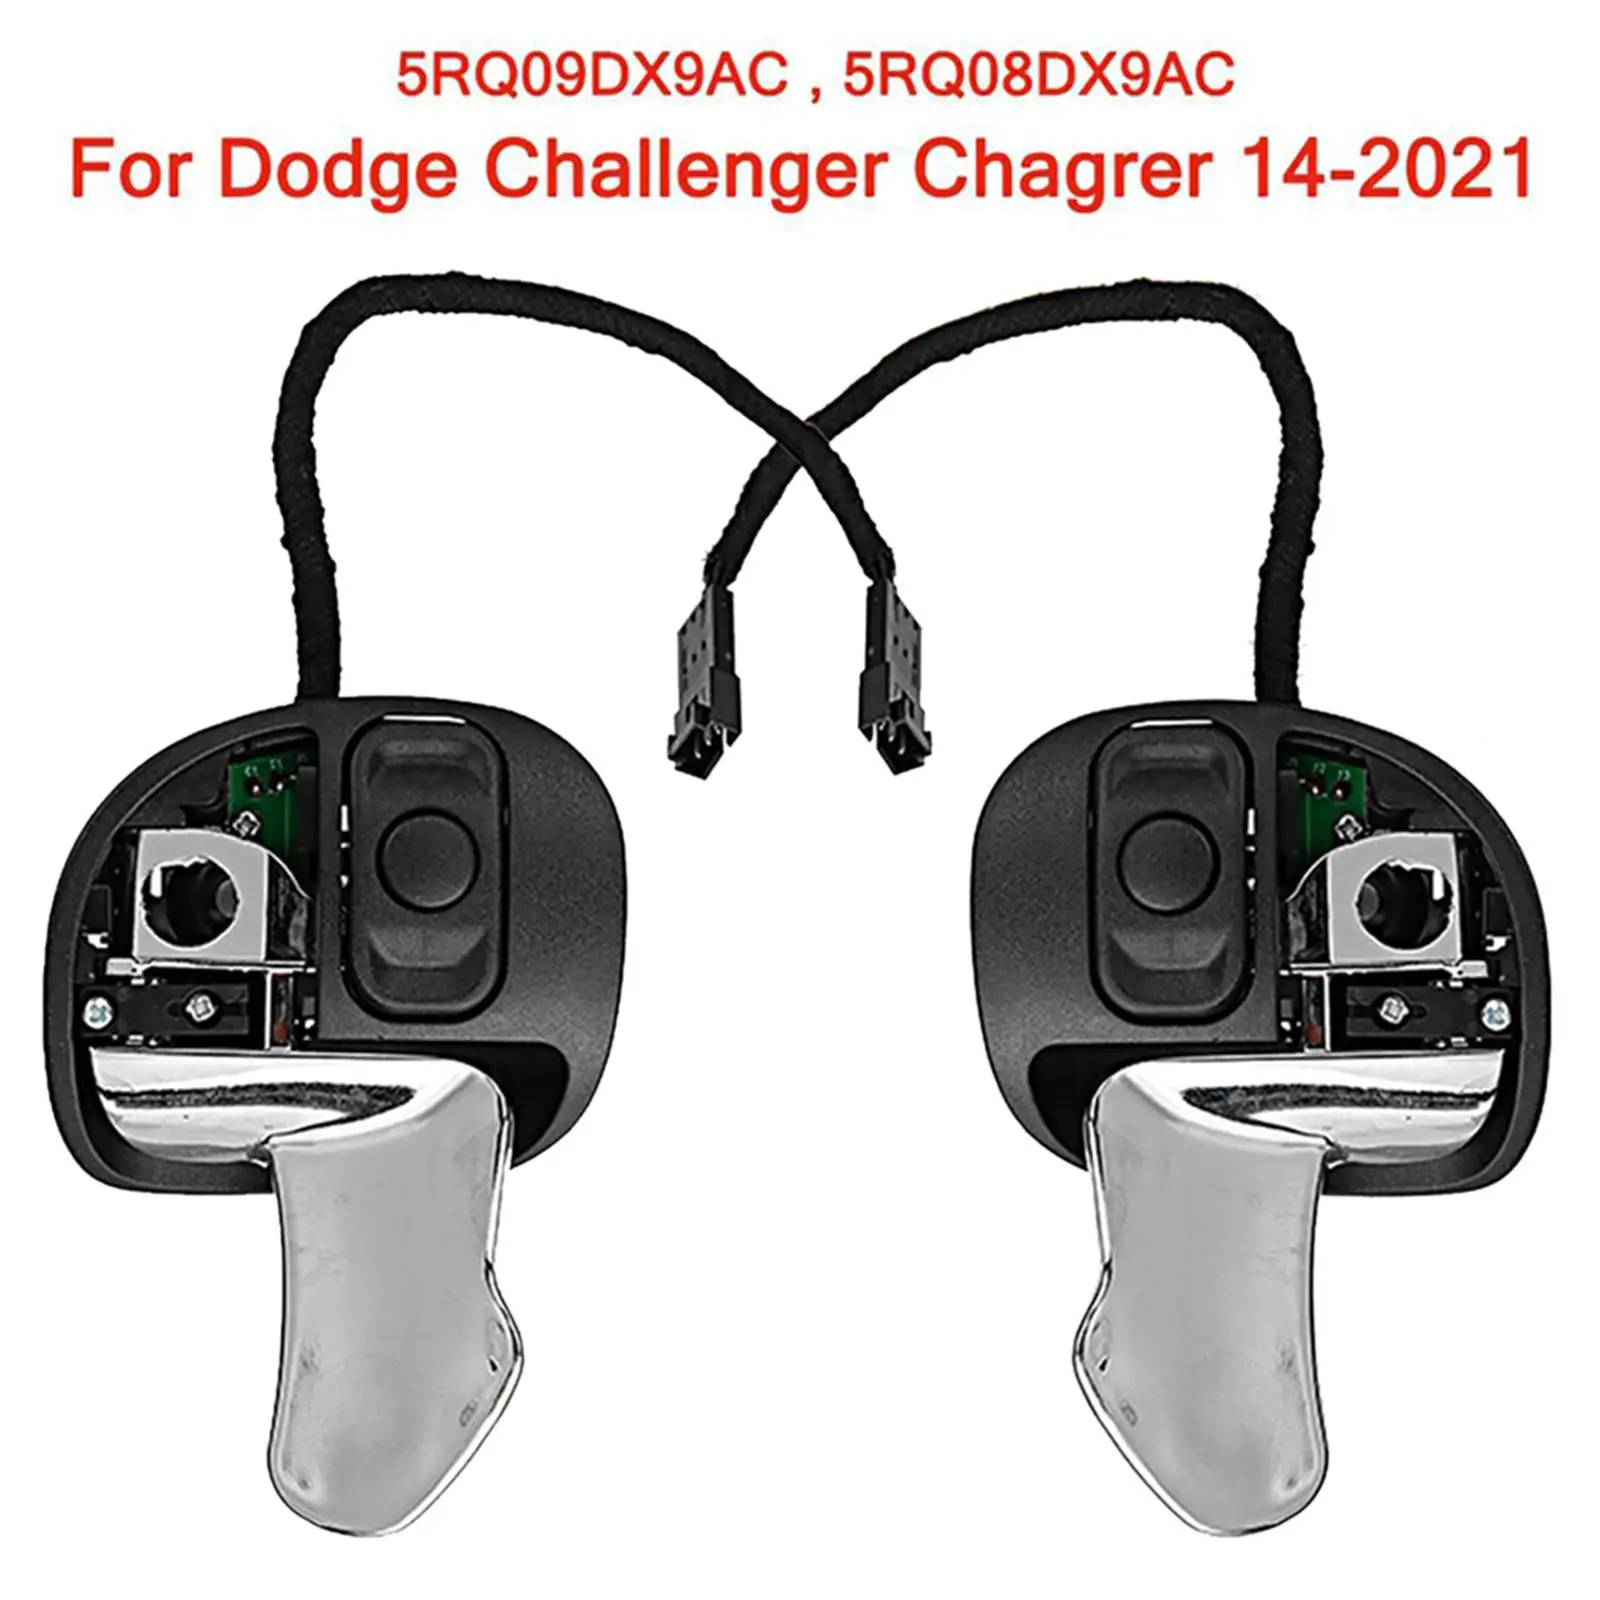 5Rq09DX9AC Replacement Paddle Shifter Set for